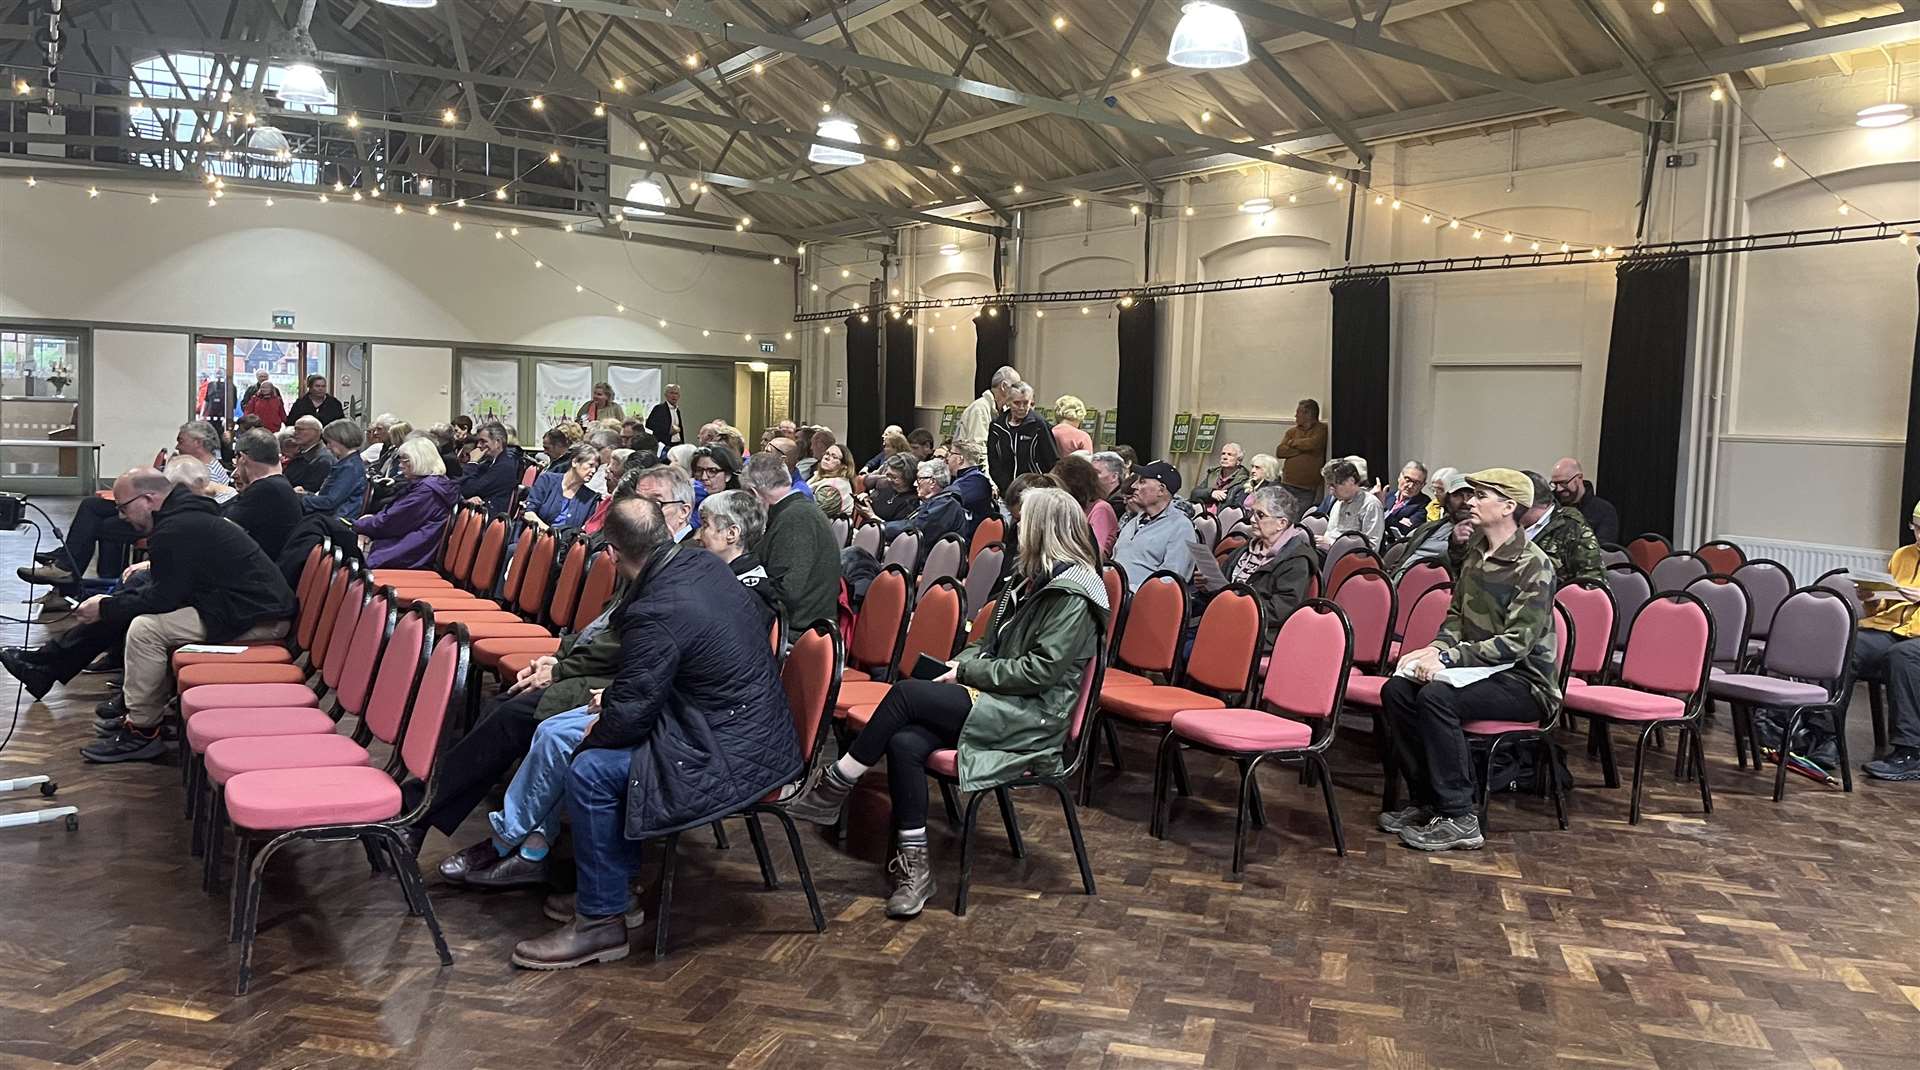 Tempers were raised when issues surrounding the 2,000-home development for land north of the University of Kent were raised at a meeting at Westgate Hall on Tuesday